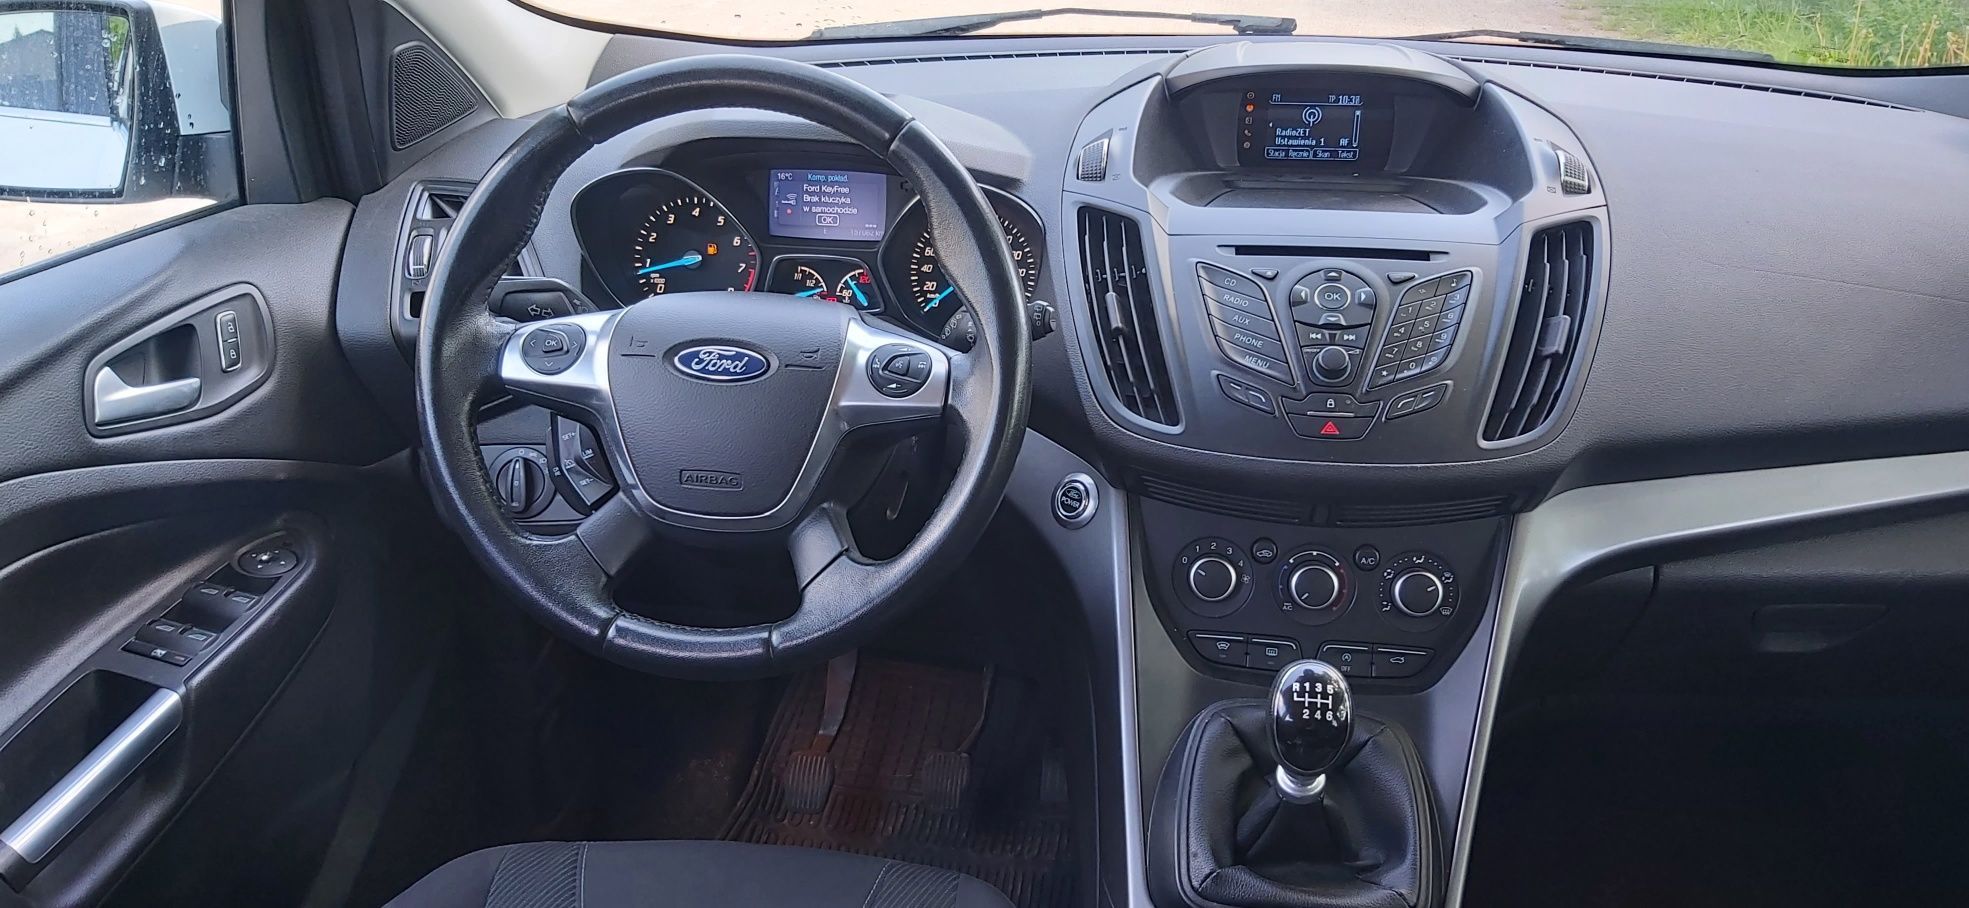 Ford Kuga 1,6 benzyna 2013r